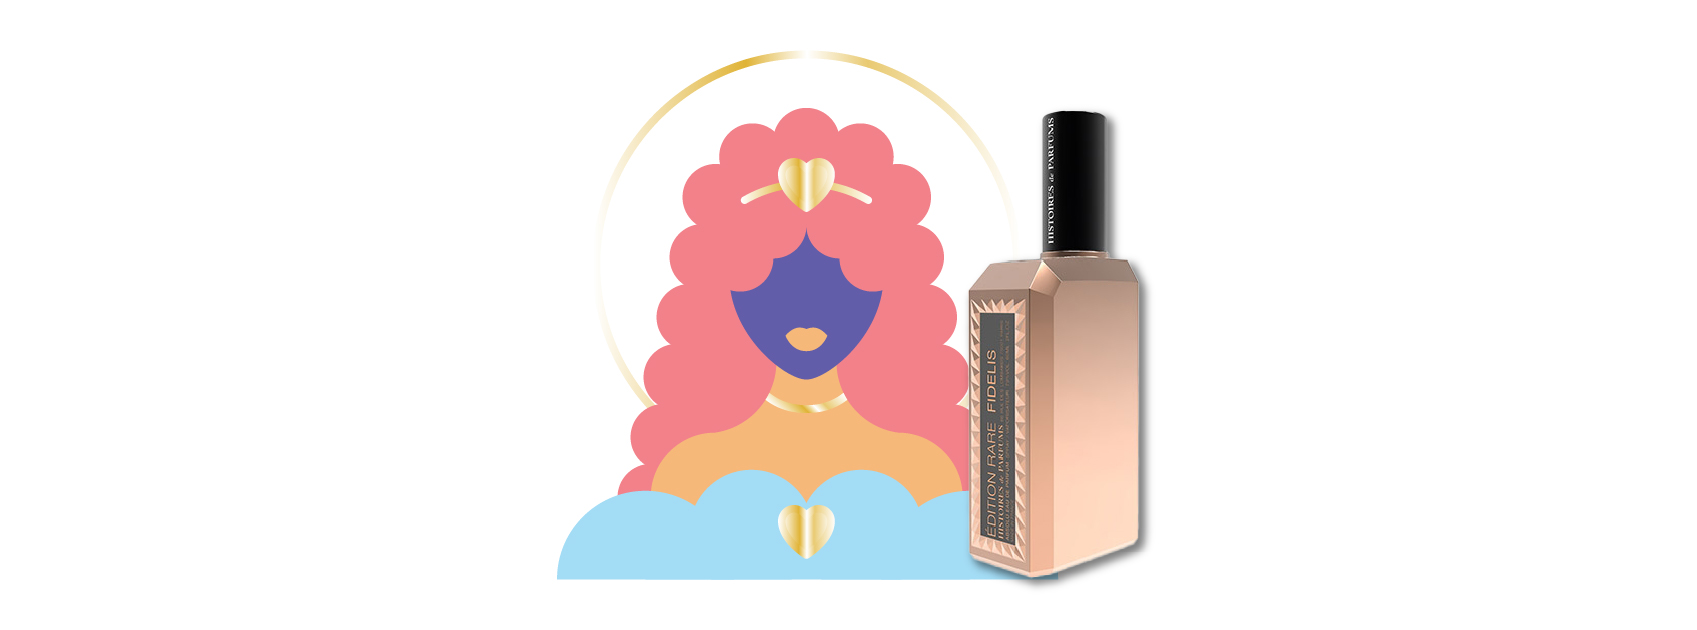 bottle of edition rare fidelis absolu perfume by histoires de parfums with an illustration of venus the goddess